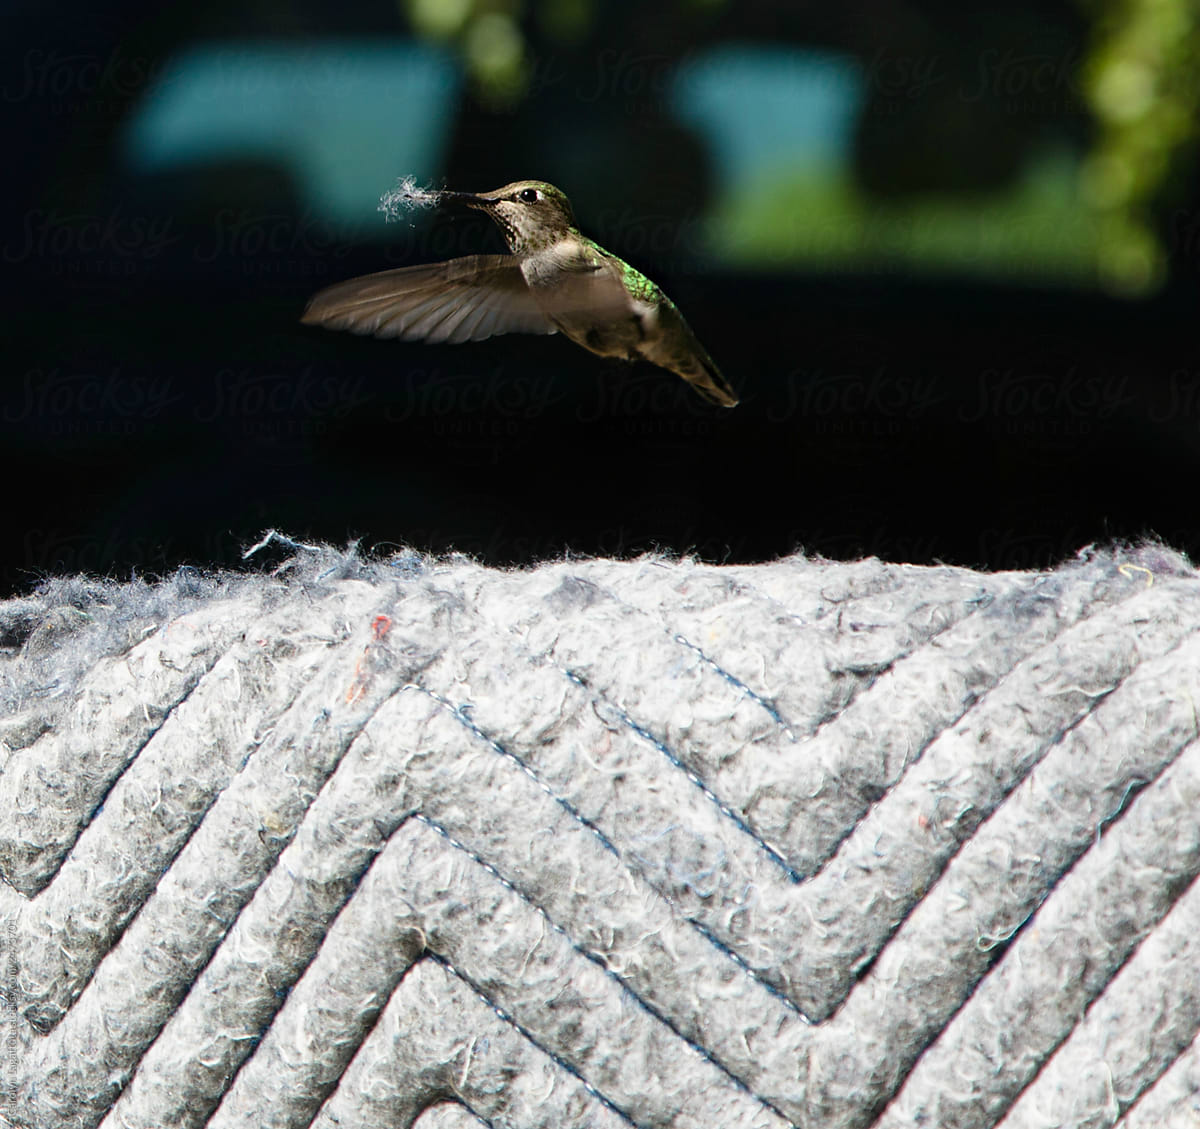 Hummingbird getting fiber from an old blanket for a nest